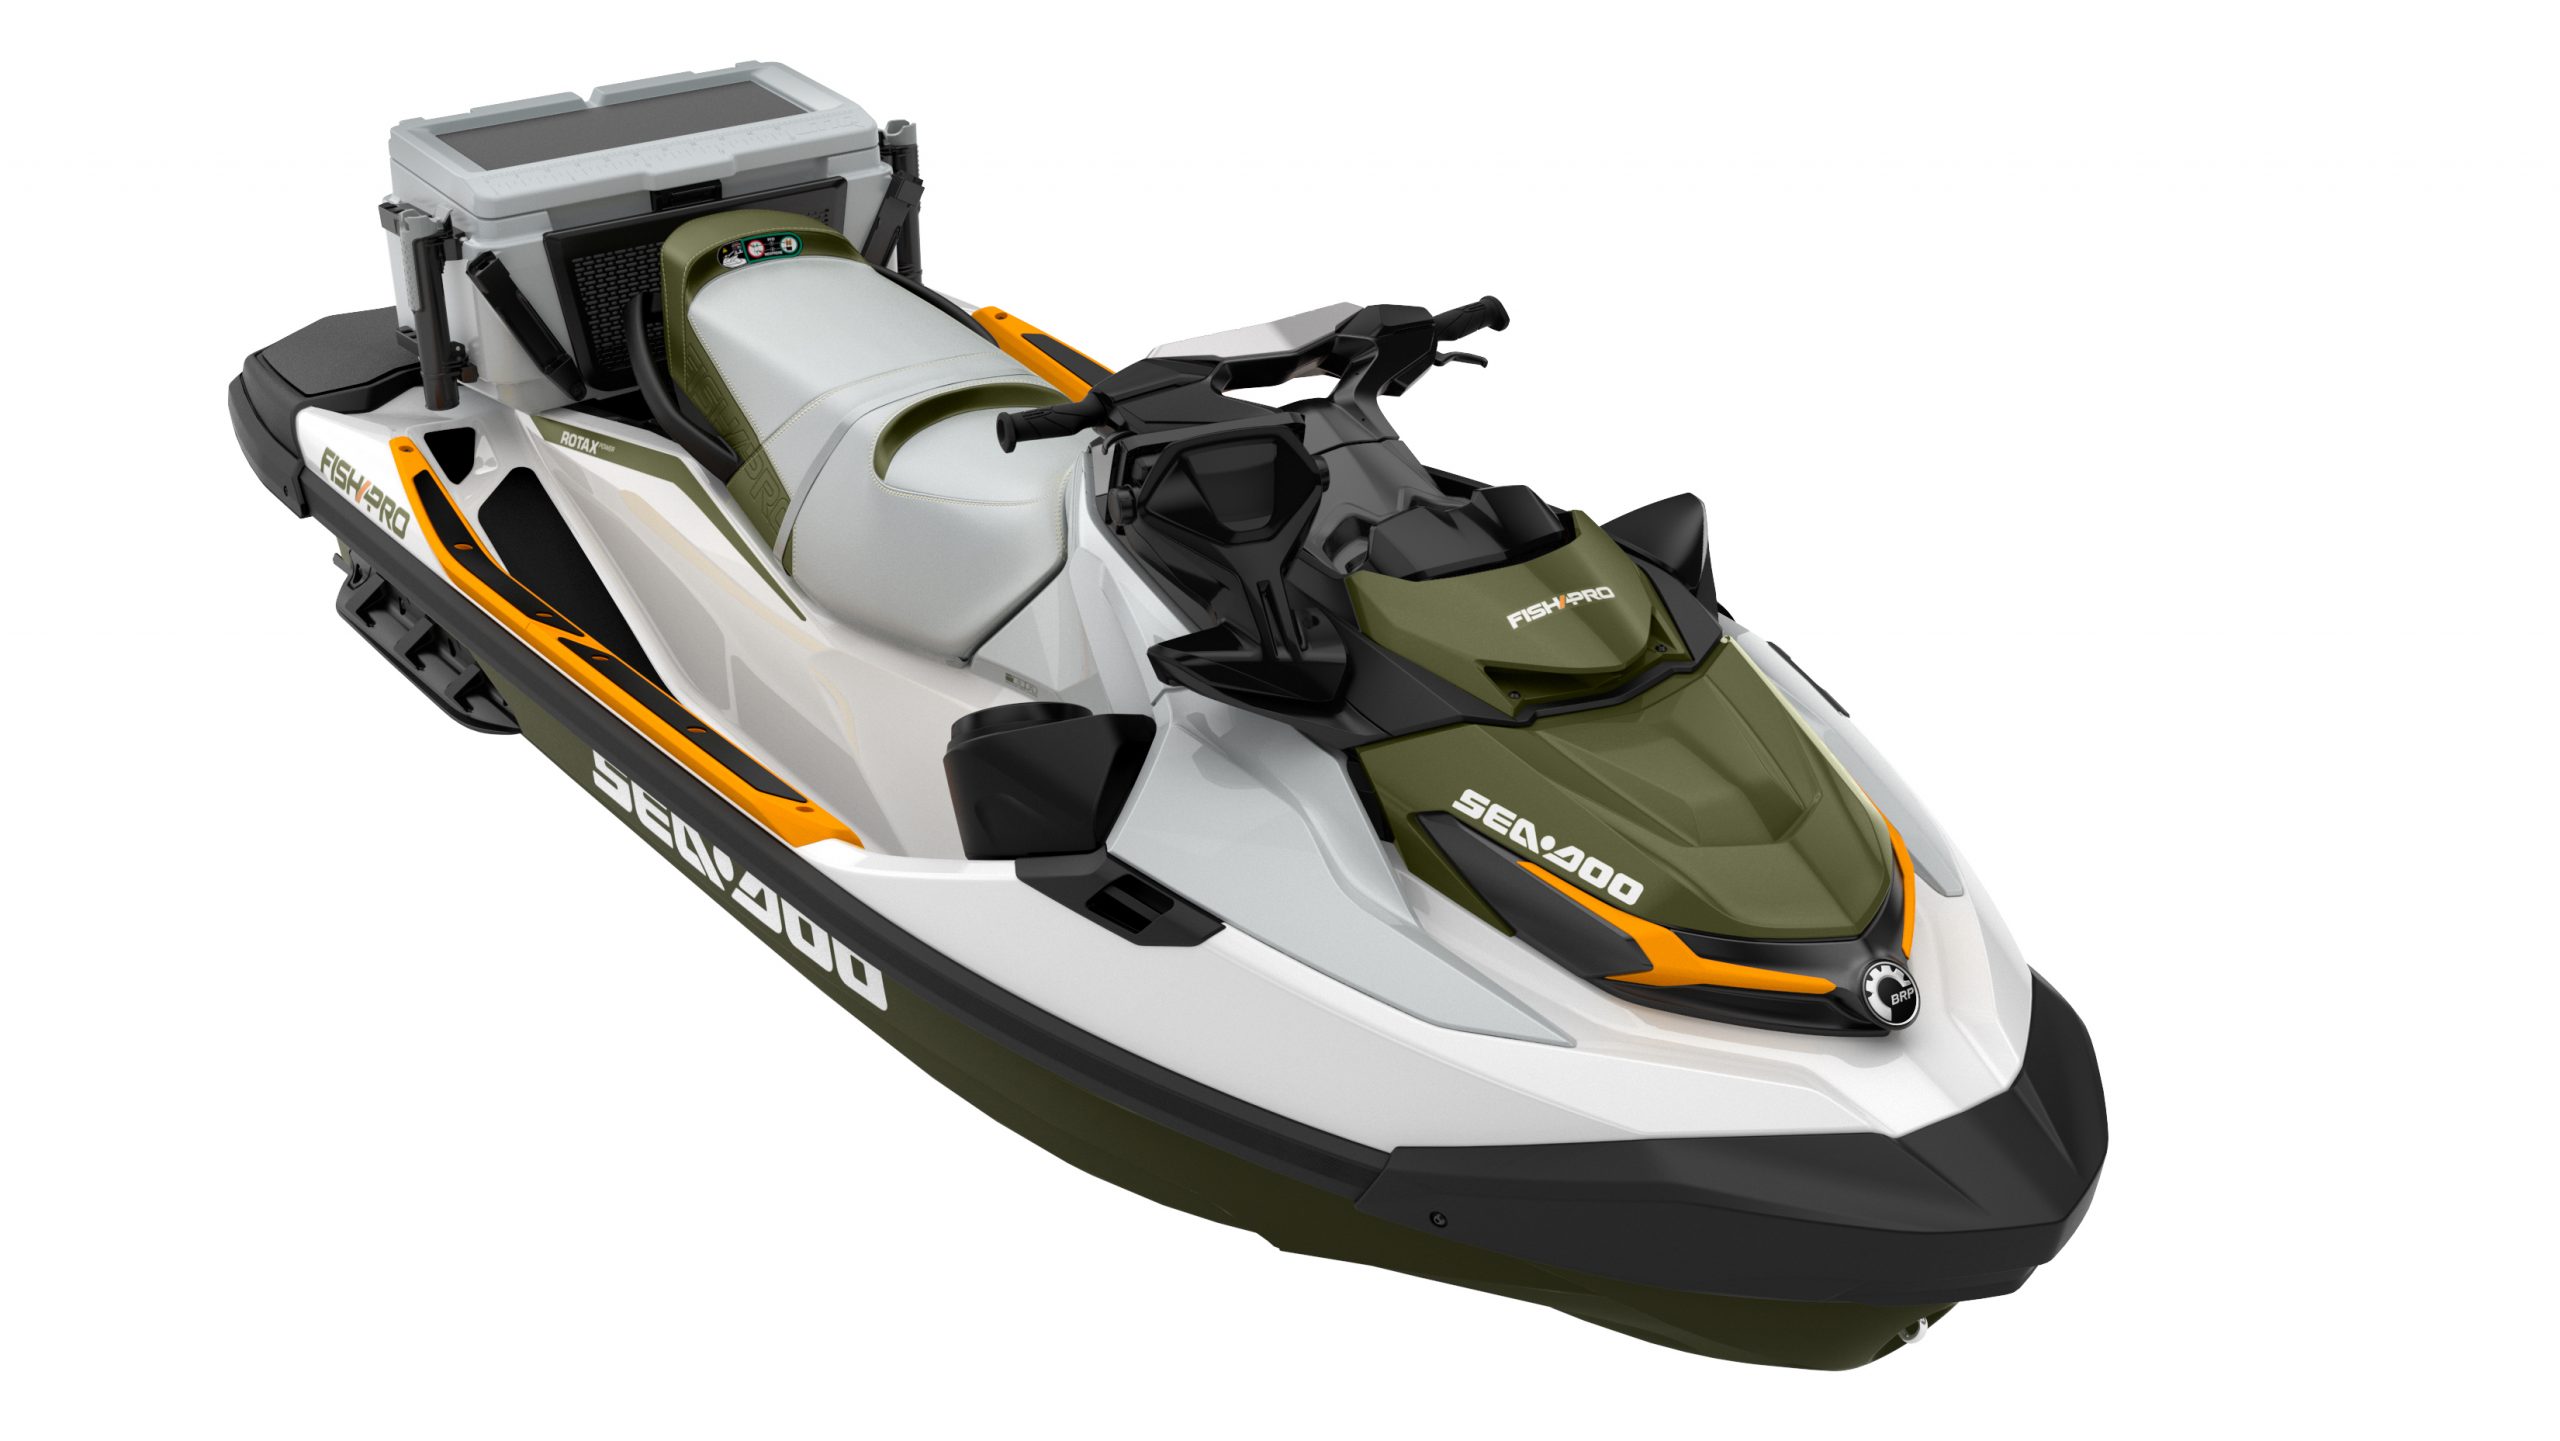 2022 SeaDoo and Yamaha models to be unveiled in August, Kawasaki Jet